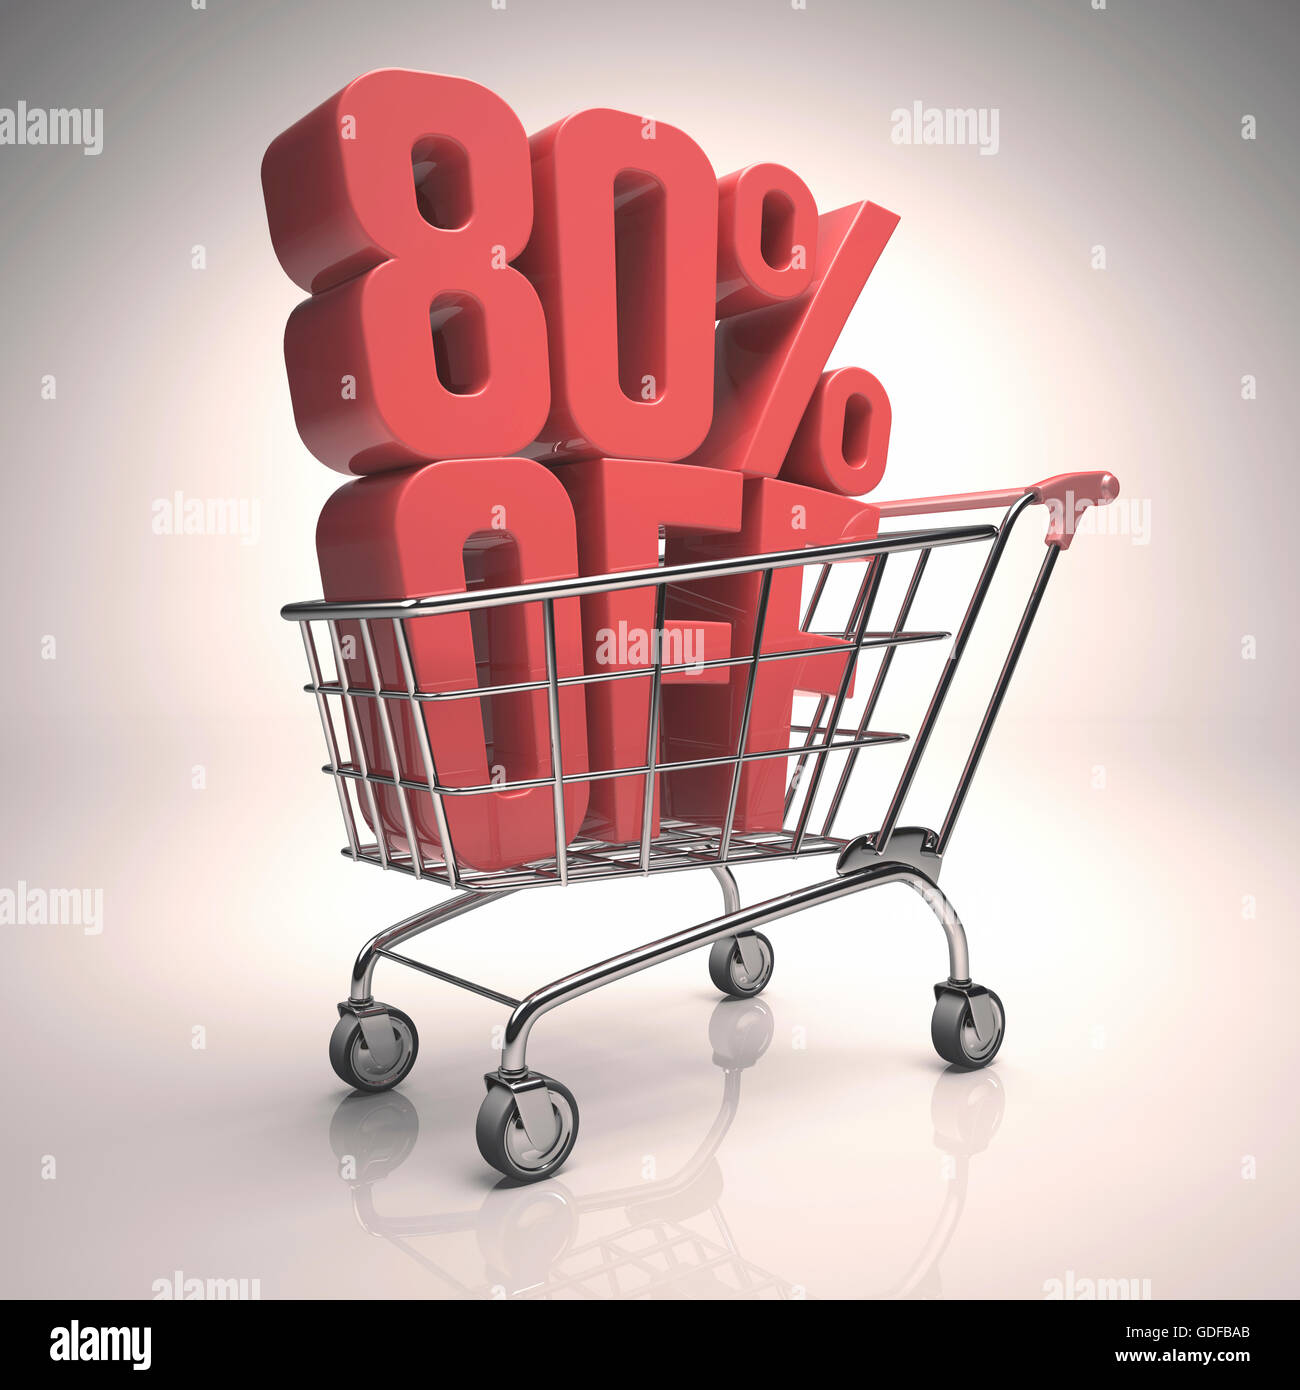 Shopping trolley with 80 per cent off sign, illustration. Stock Photo